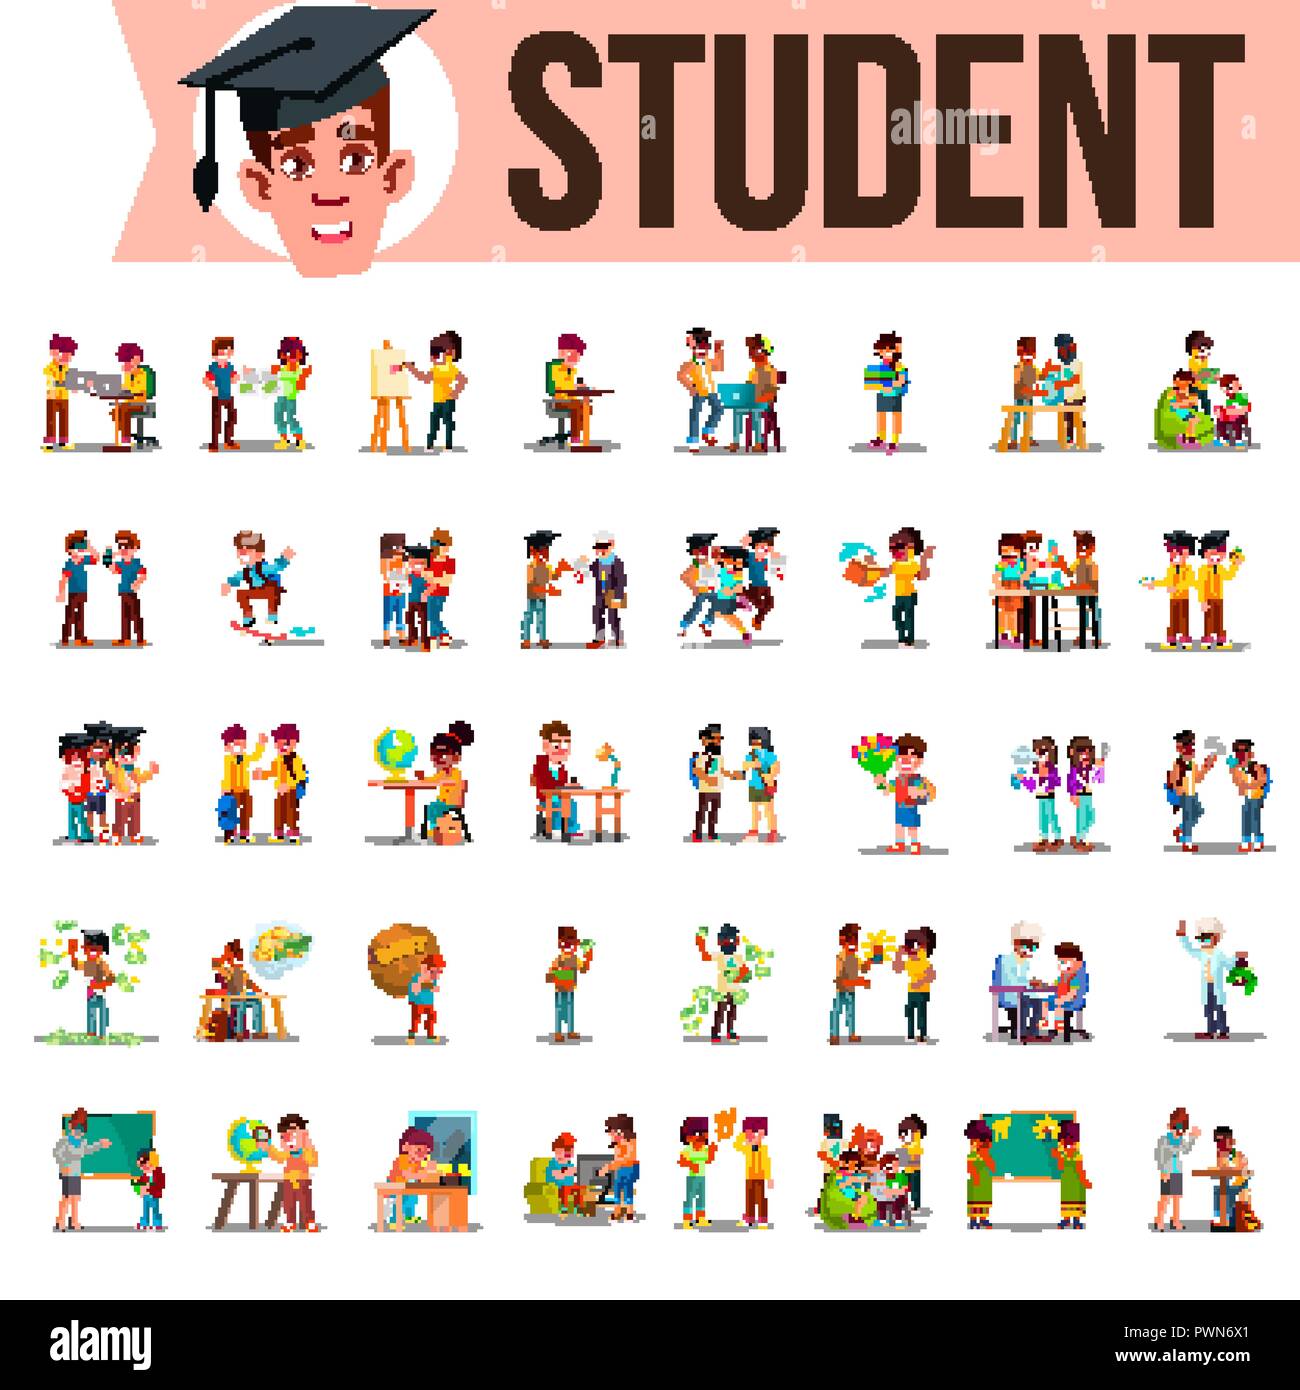 Student Set Vector. Lifestyle Situations. Spending Time, At College, University, Campus, School, Home, Outdoor. Isolated Cartoon Illustration Stock Vector